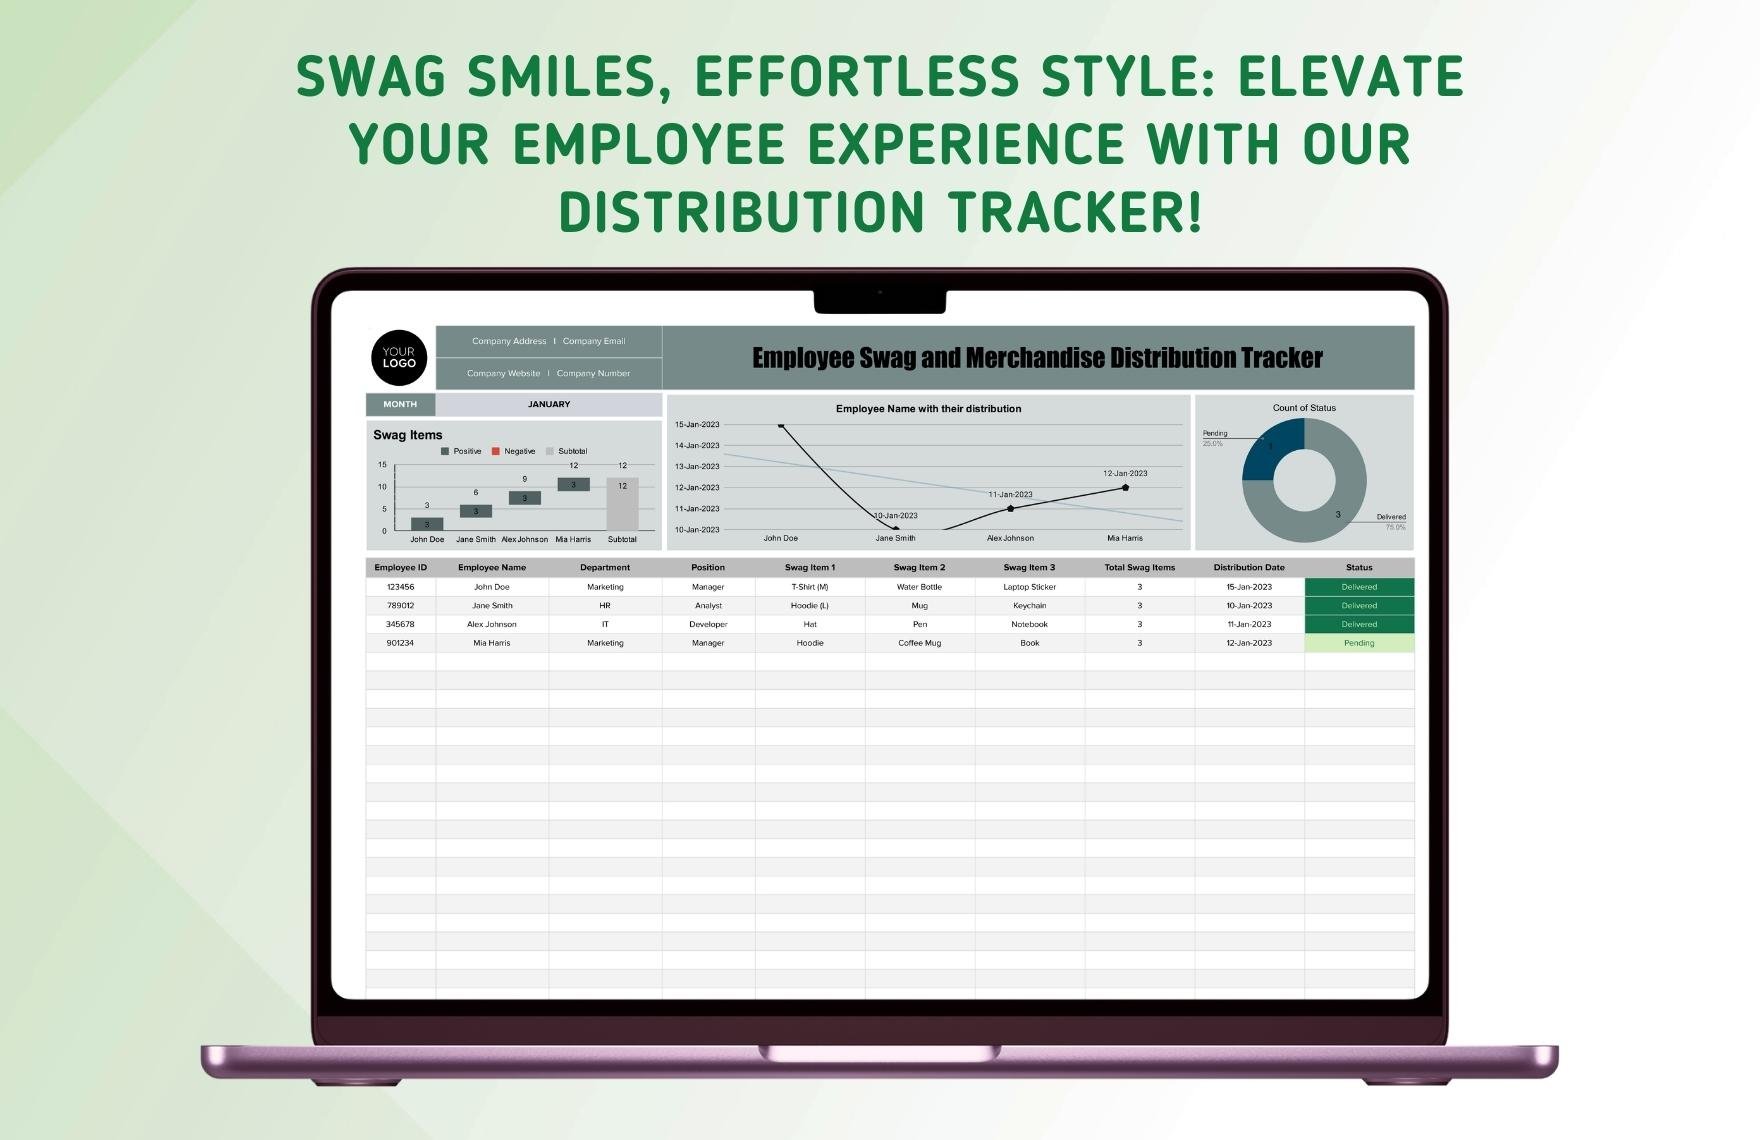 Employee Swag and Merchandise Distribution Tracker HR Template